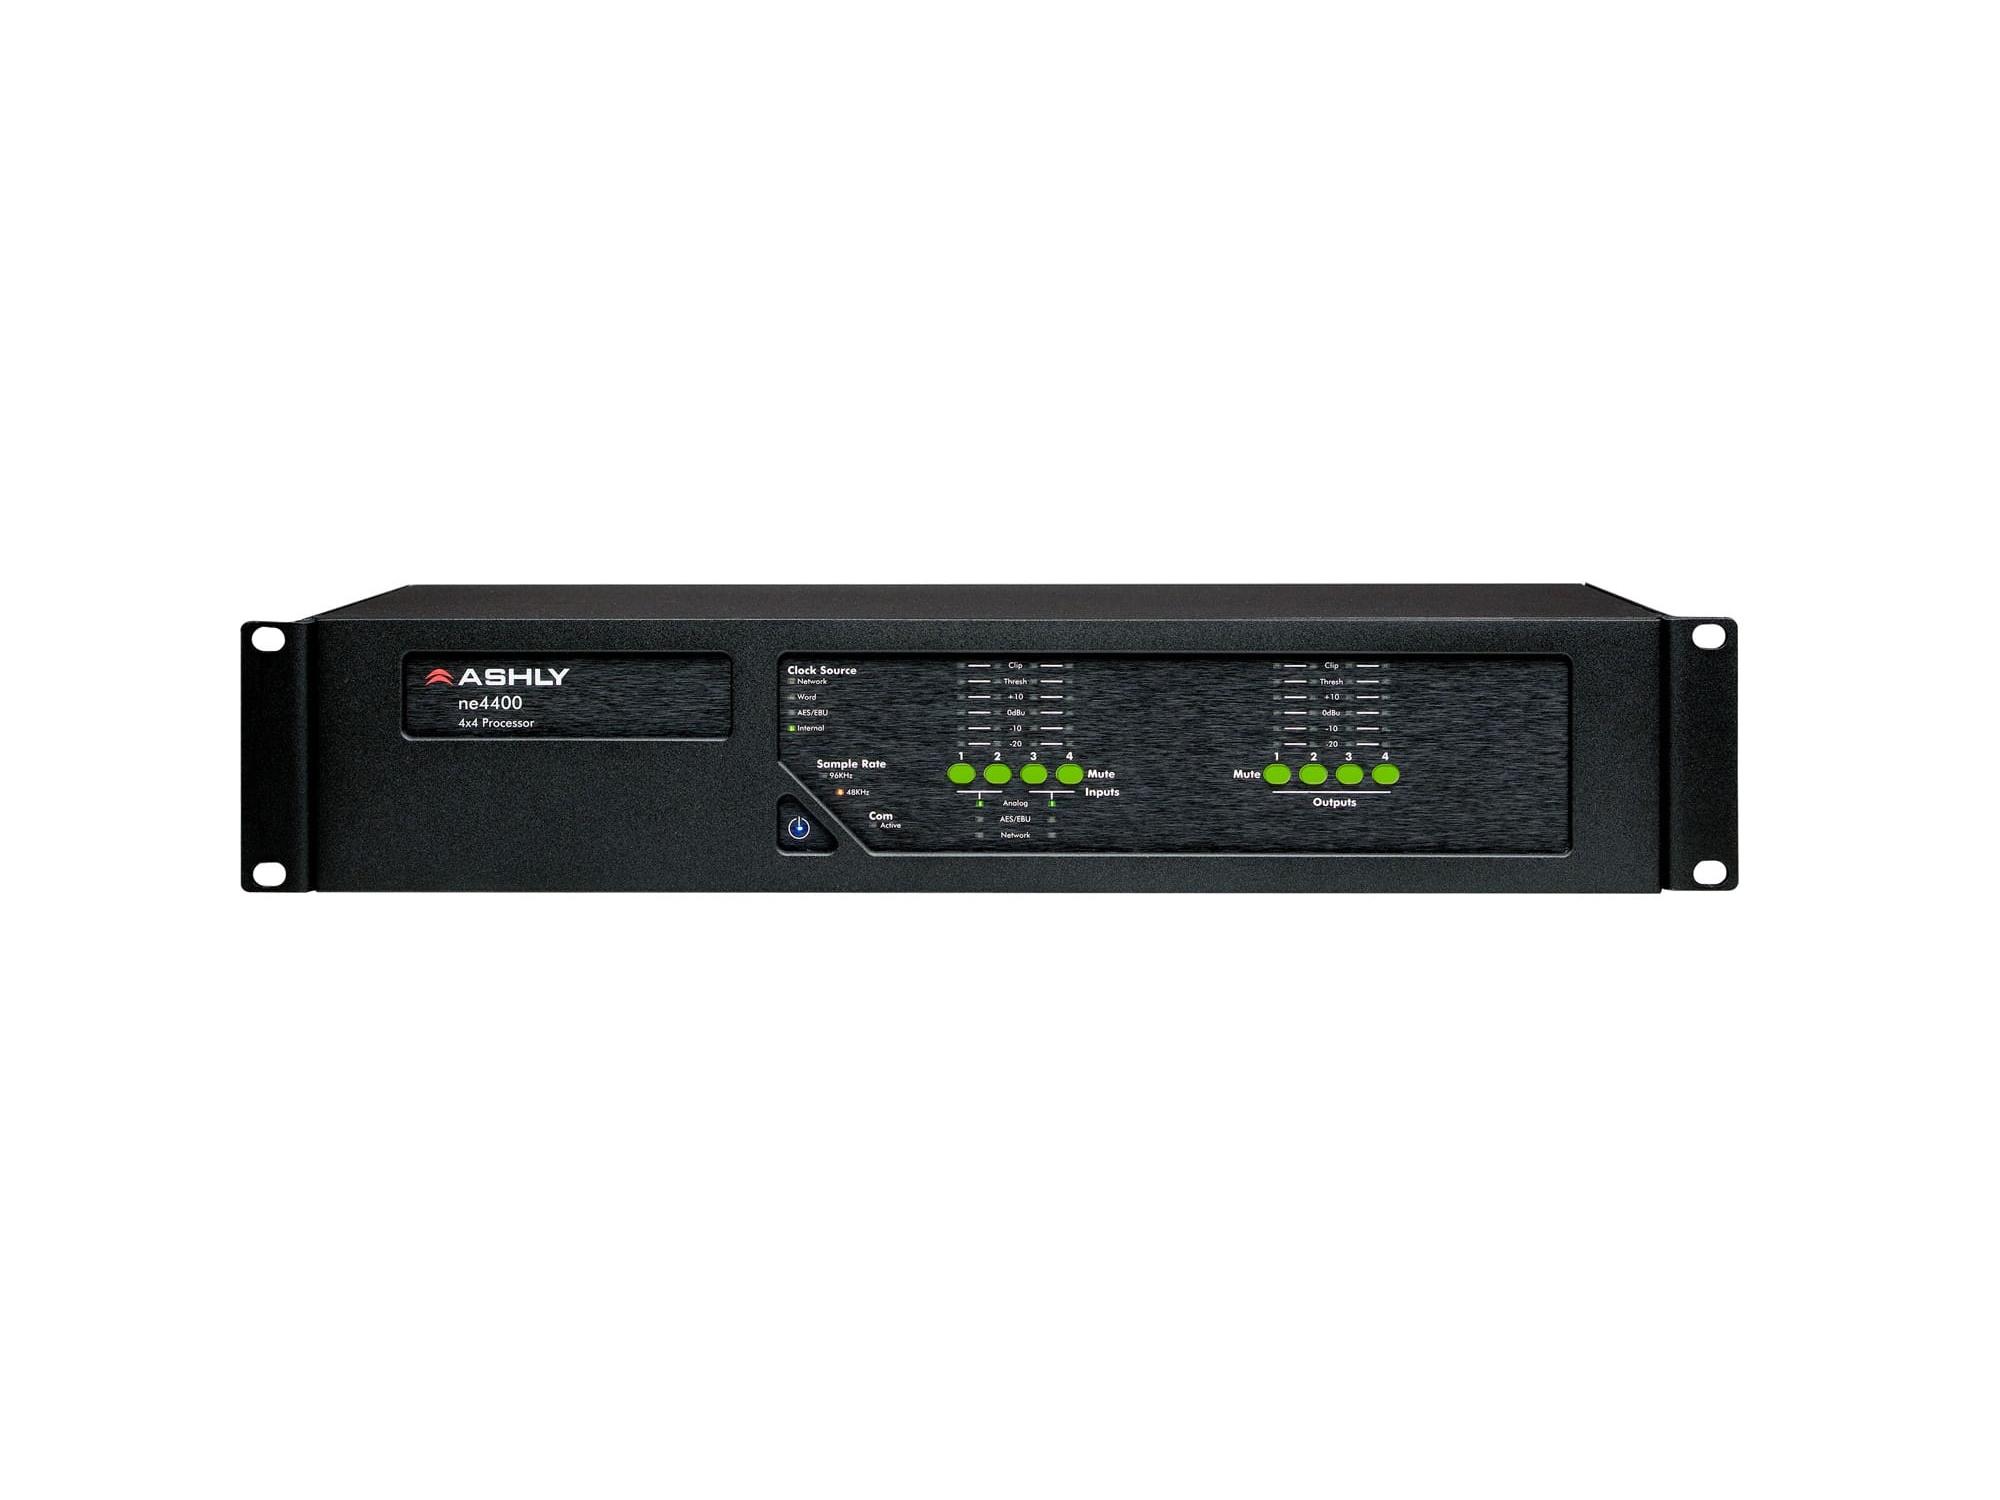 Ashly ne4400s Protea DSP Audio System Processor 4x4 I/O with 4-Channel AES3 Outputs